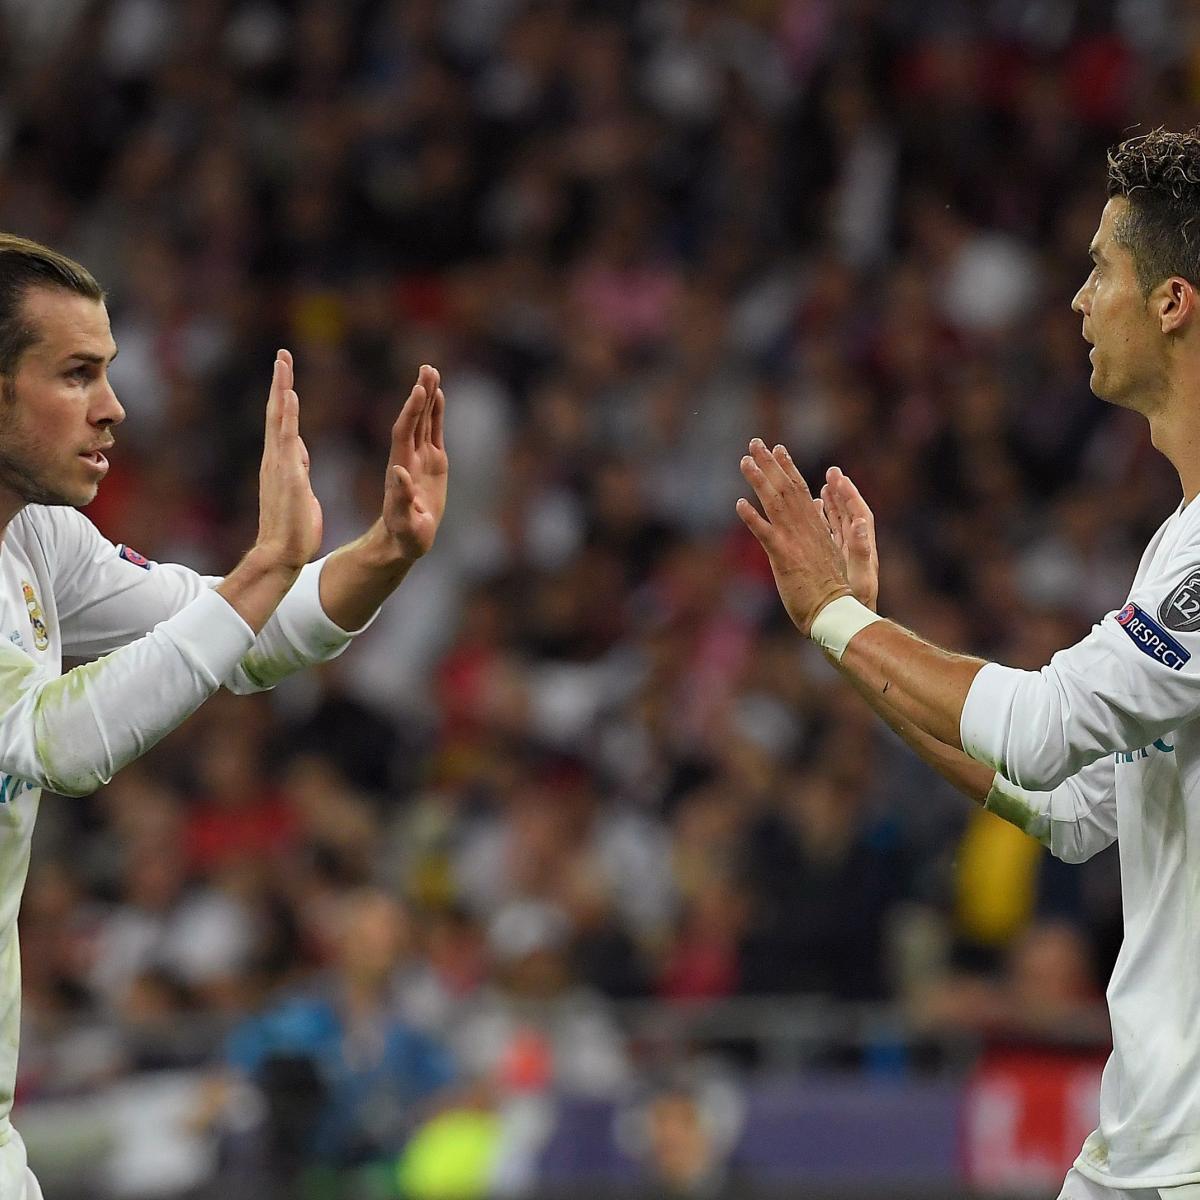 Gareth Bale Says Reported Problems with Cristiano Ronaldo 'Were Never There'